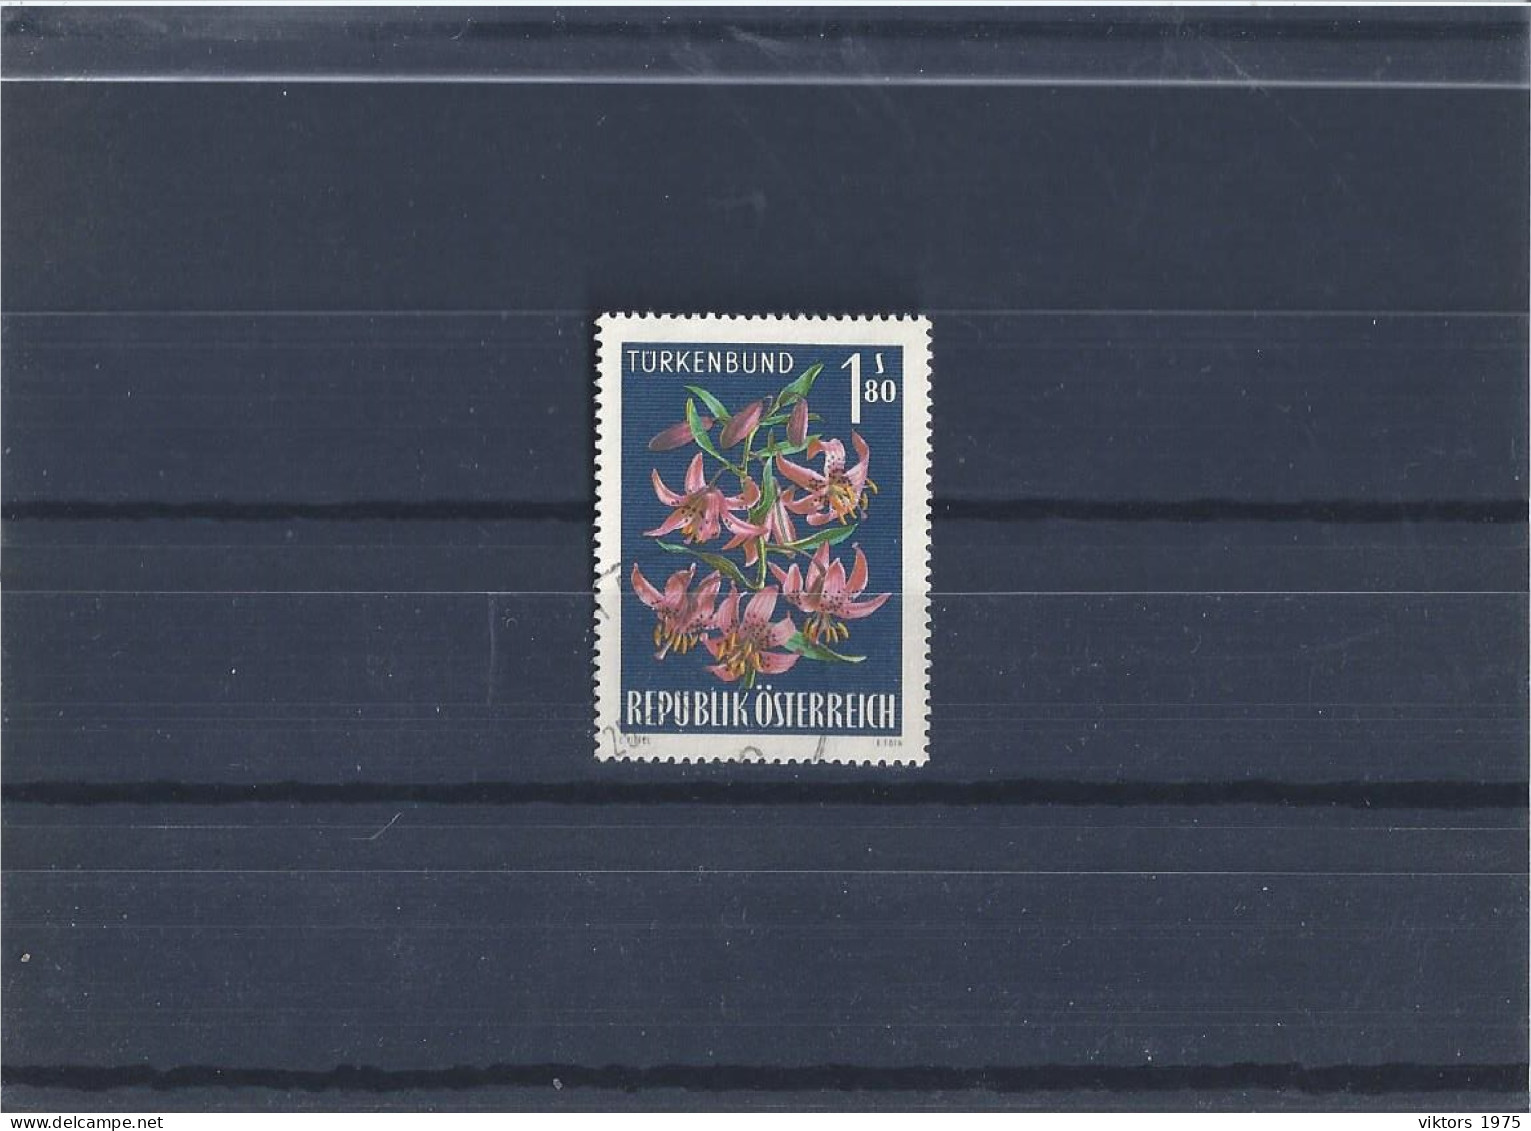 Used Stamp Nr.1210 In MICHEL Catalog - Used Stamps